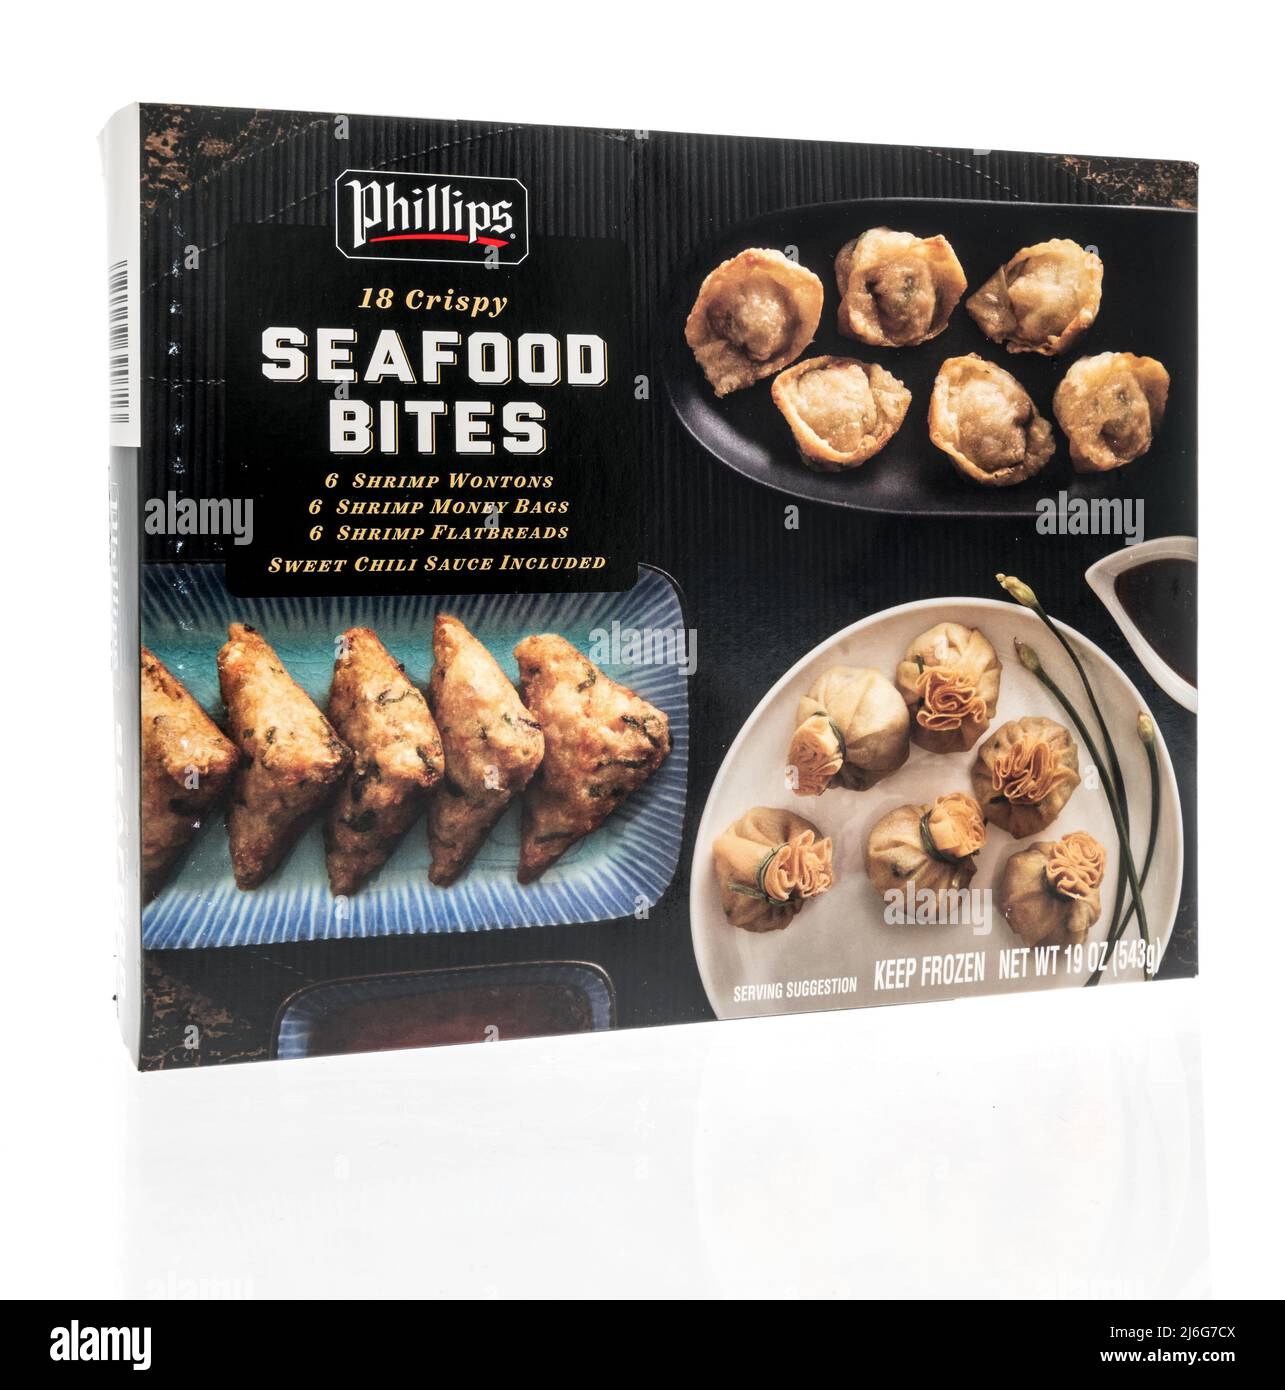 Winneconne, WI -23 April 2022: A package of phillips seafood bites with wontons, money bags and flatbreads  on an isolated background Stock Photo